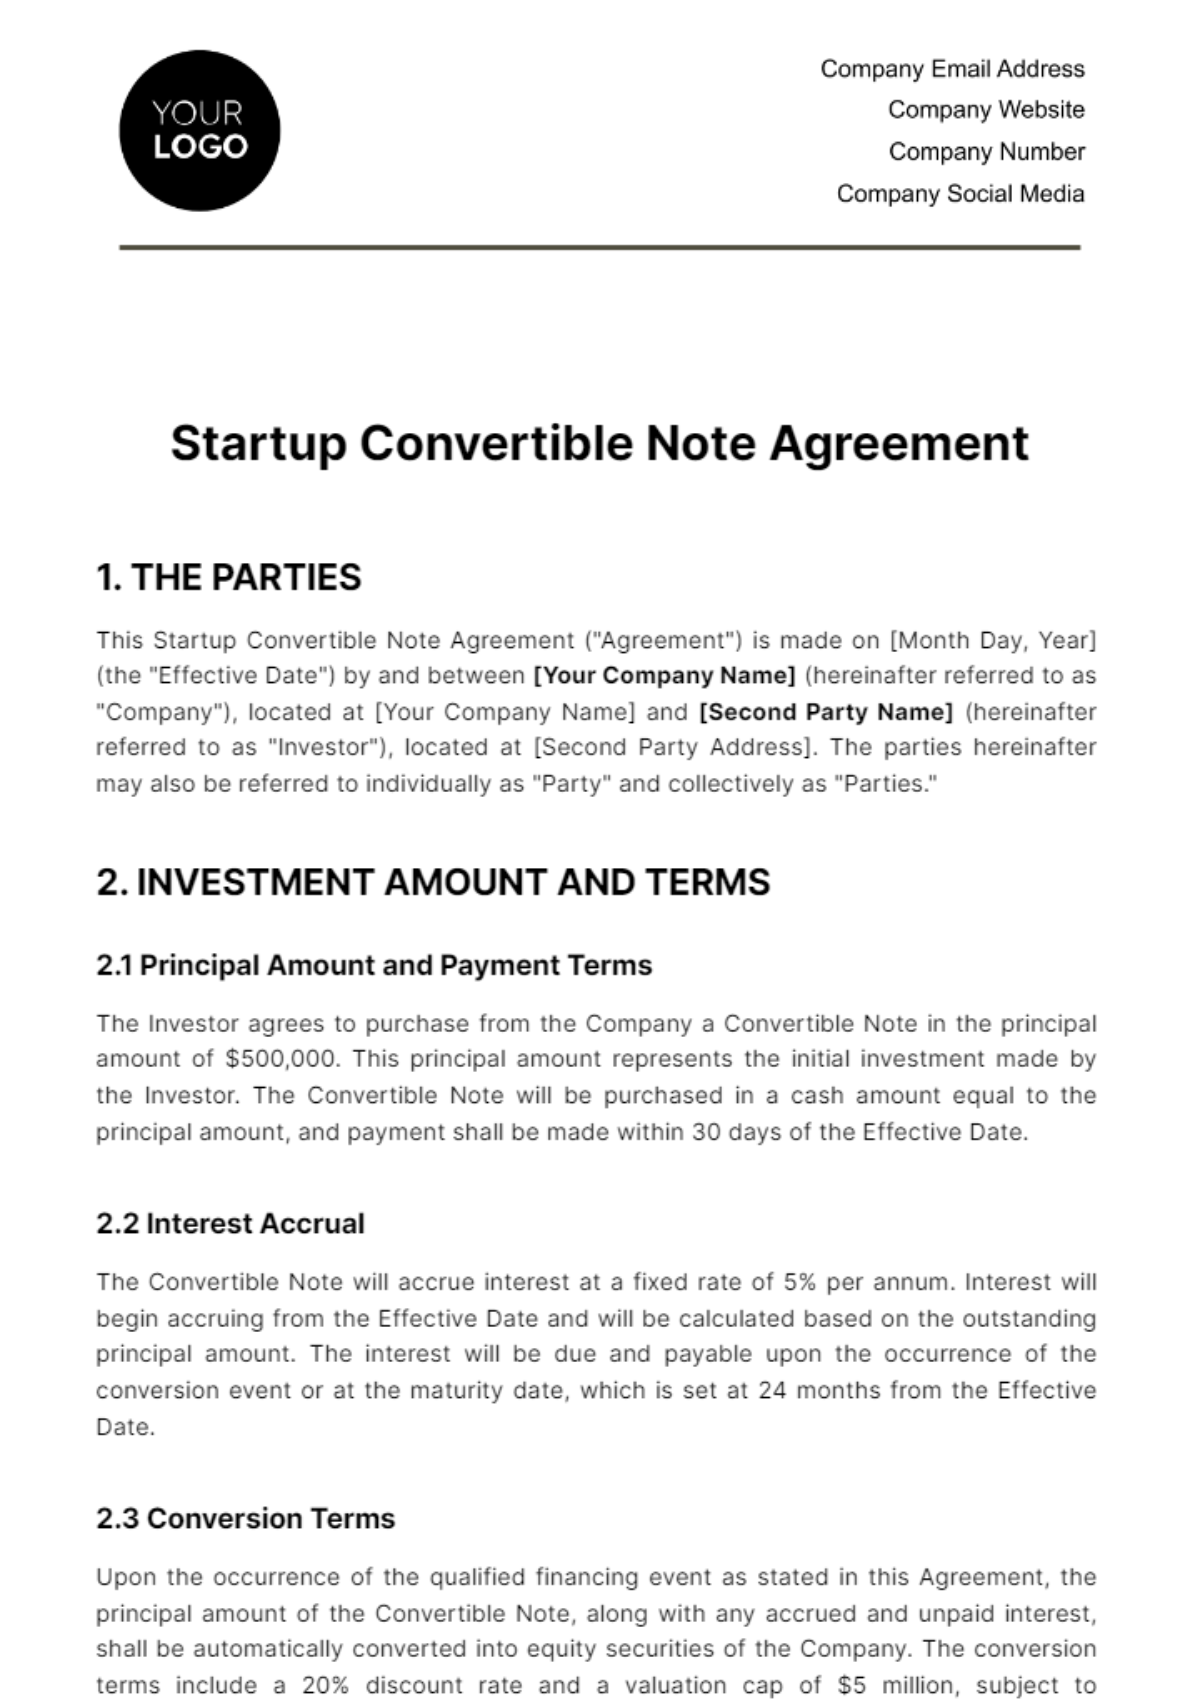 Startup Convertible Note Agreement Template